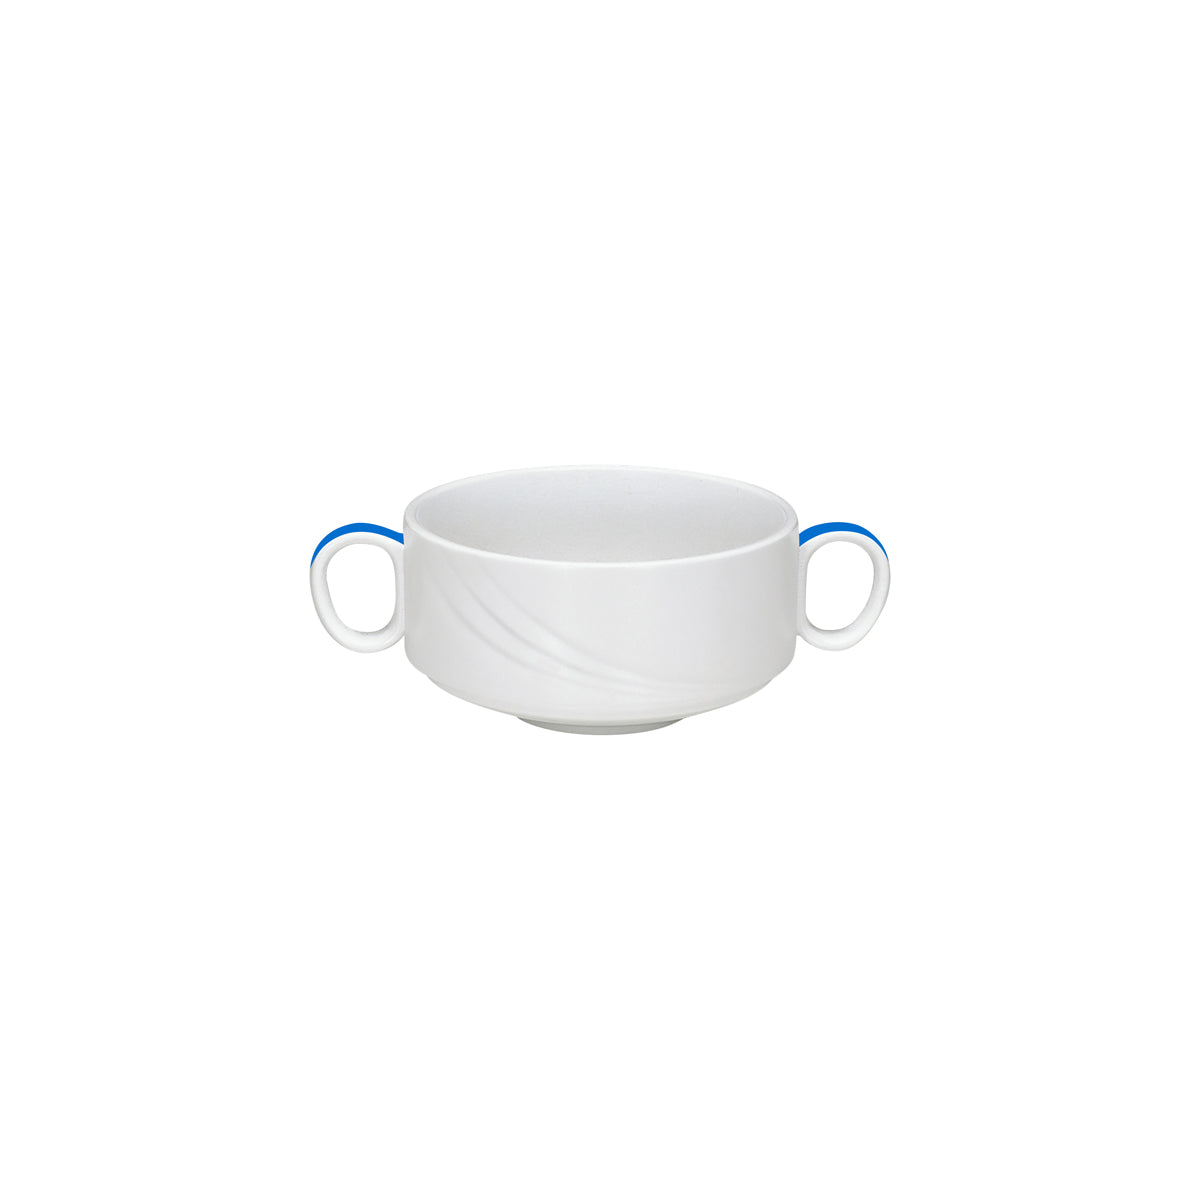 SH9182740/62961 Donna Senior Decor Stackable Soup Cup with 2 Handles with Medium Blue Band 108x66mm / 480ml Tomkin Australia Hospitality Supplies